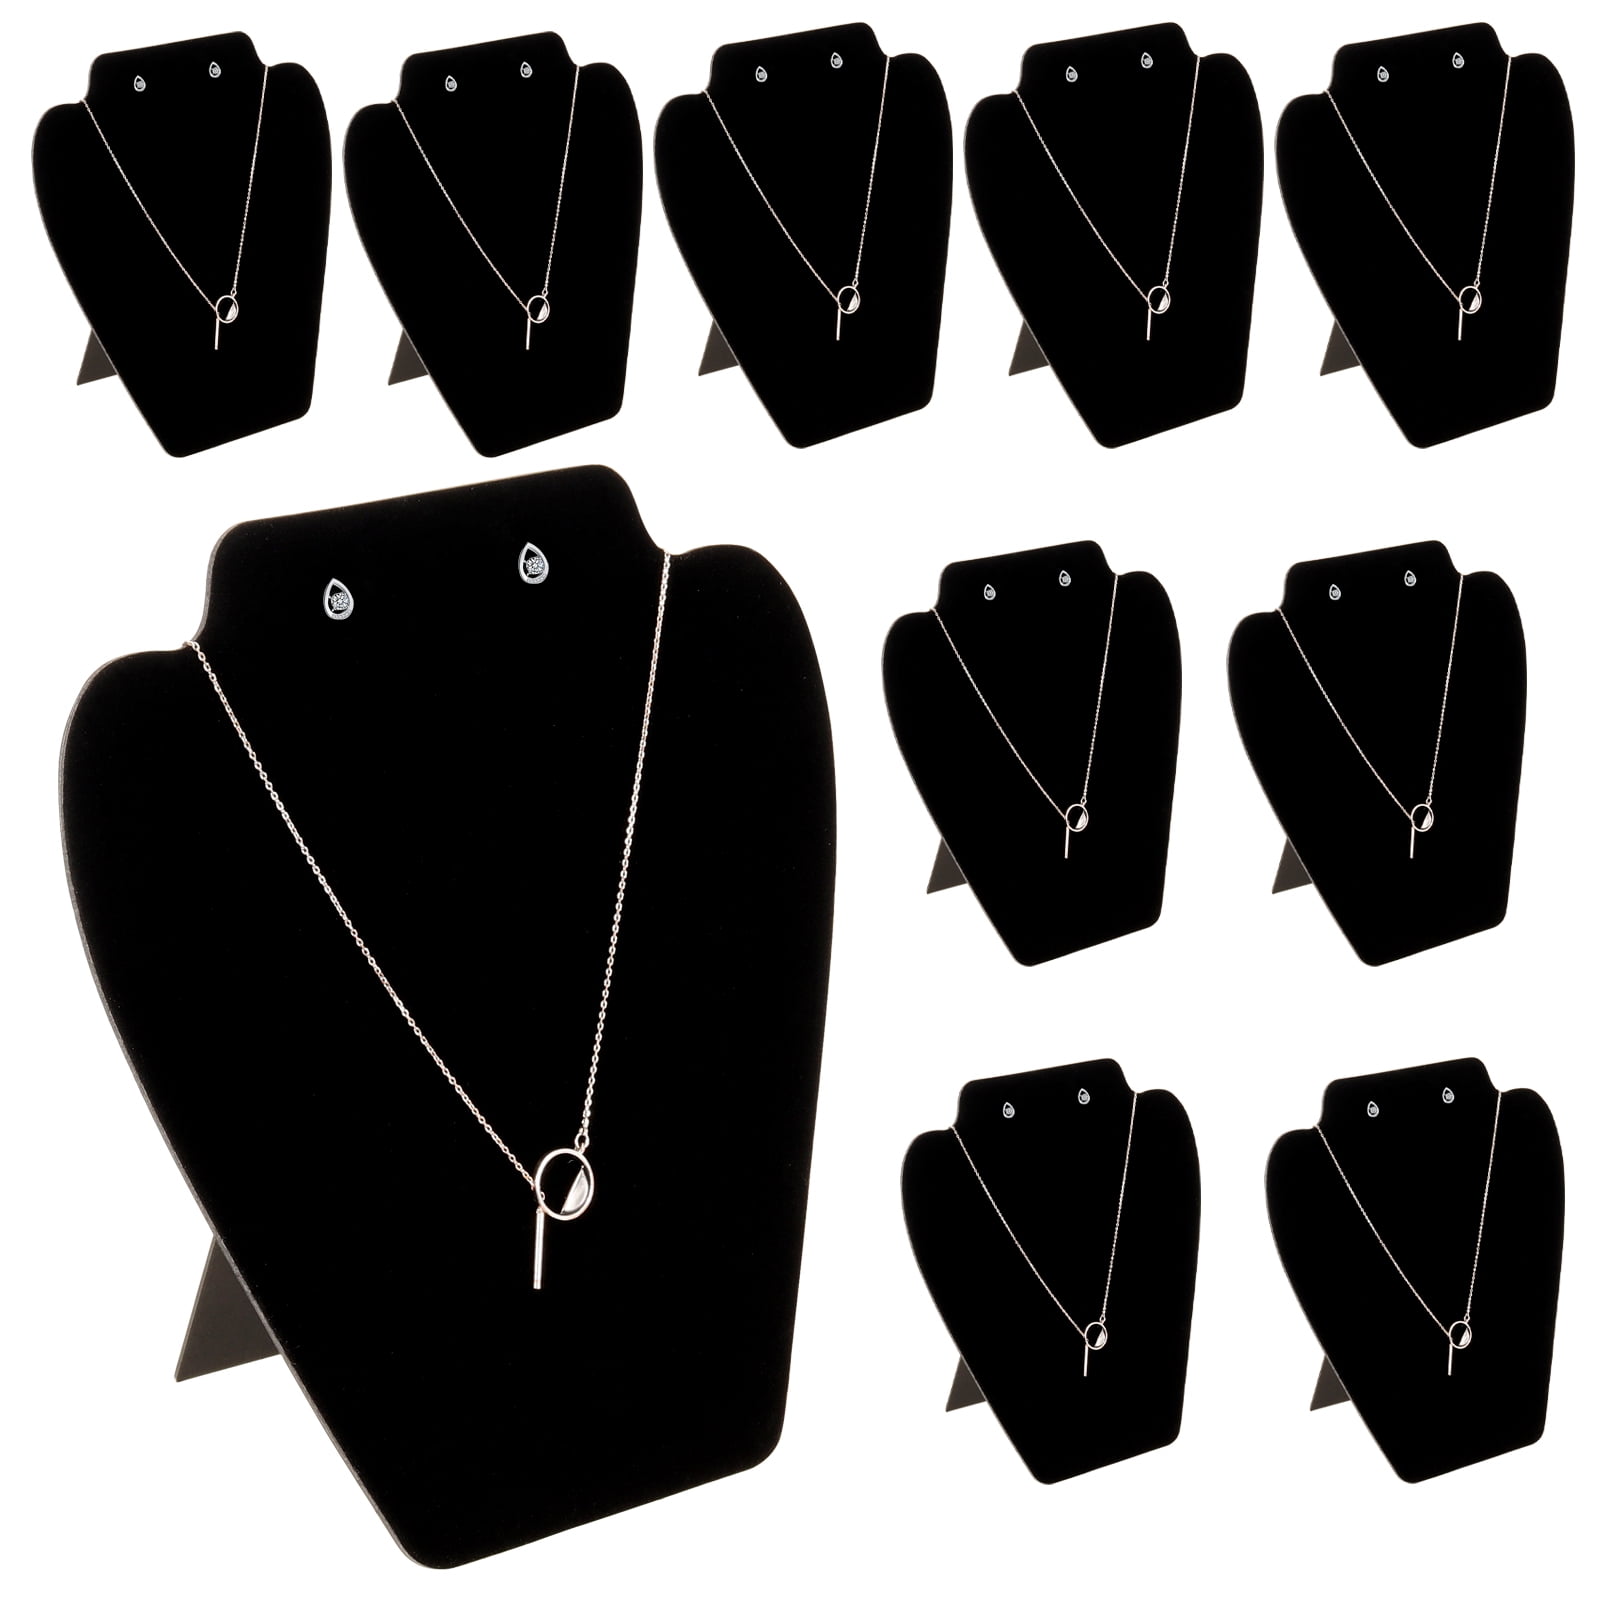 CertBuy 4 Pack Black Velvet Necklace Display Stands for Selling Jewelry  Necklace Display Stand with 17 Hooks Jewelry Storage Holder for Chain